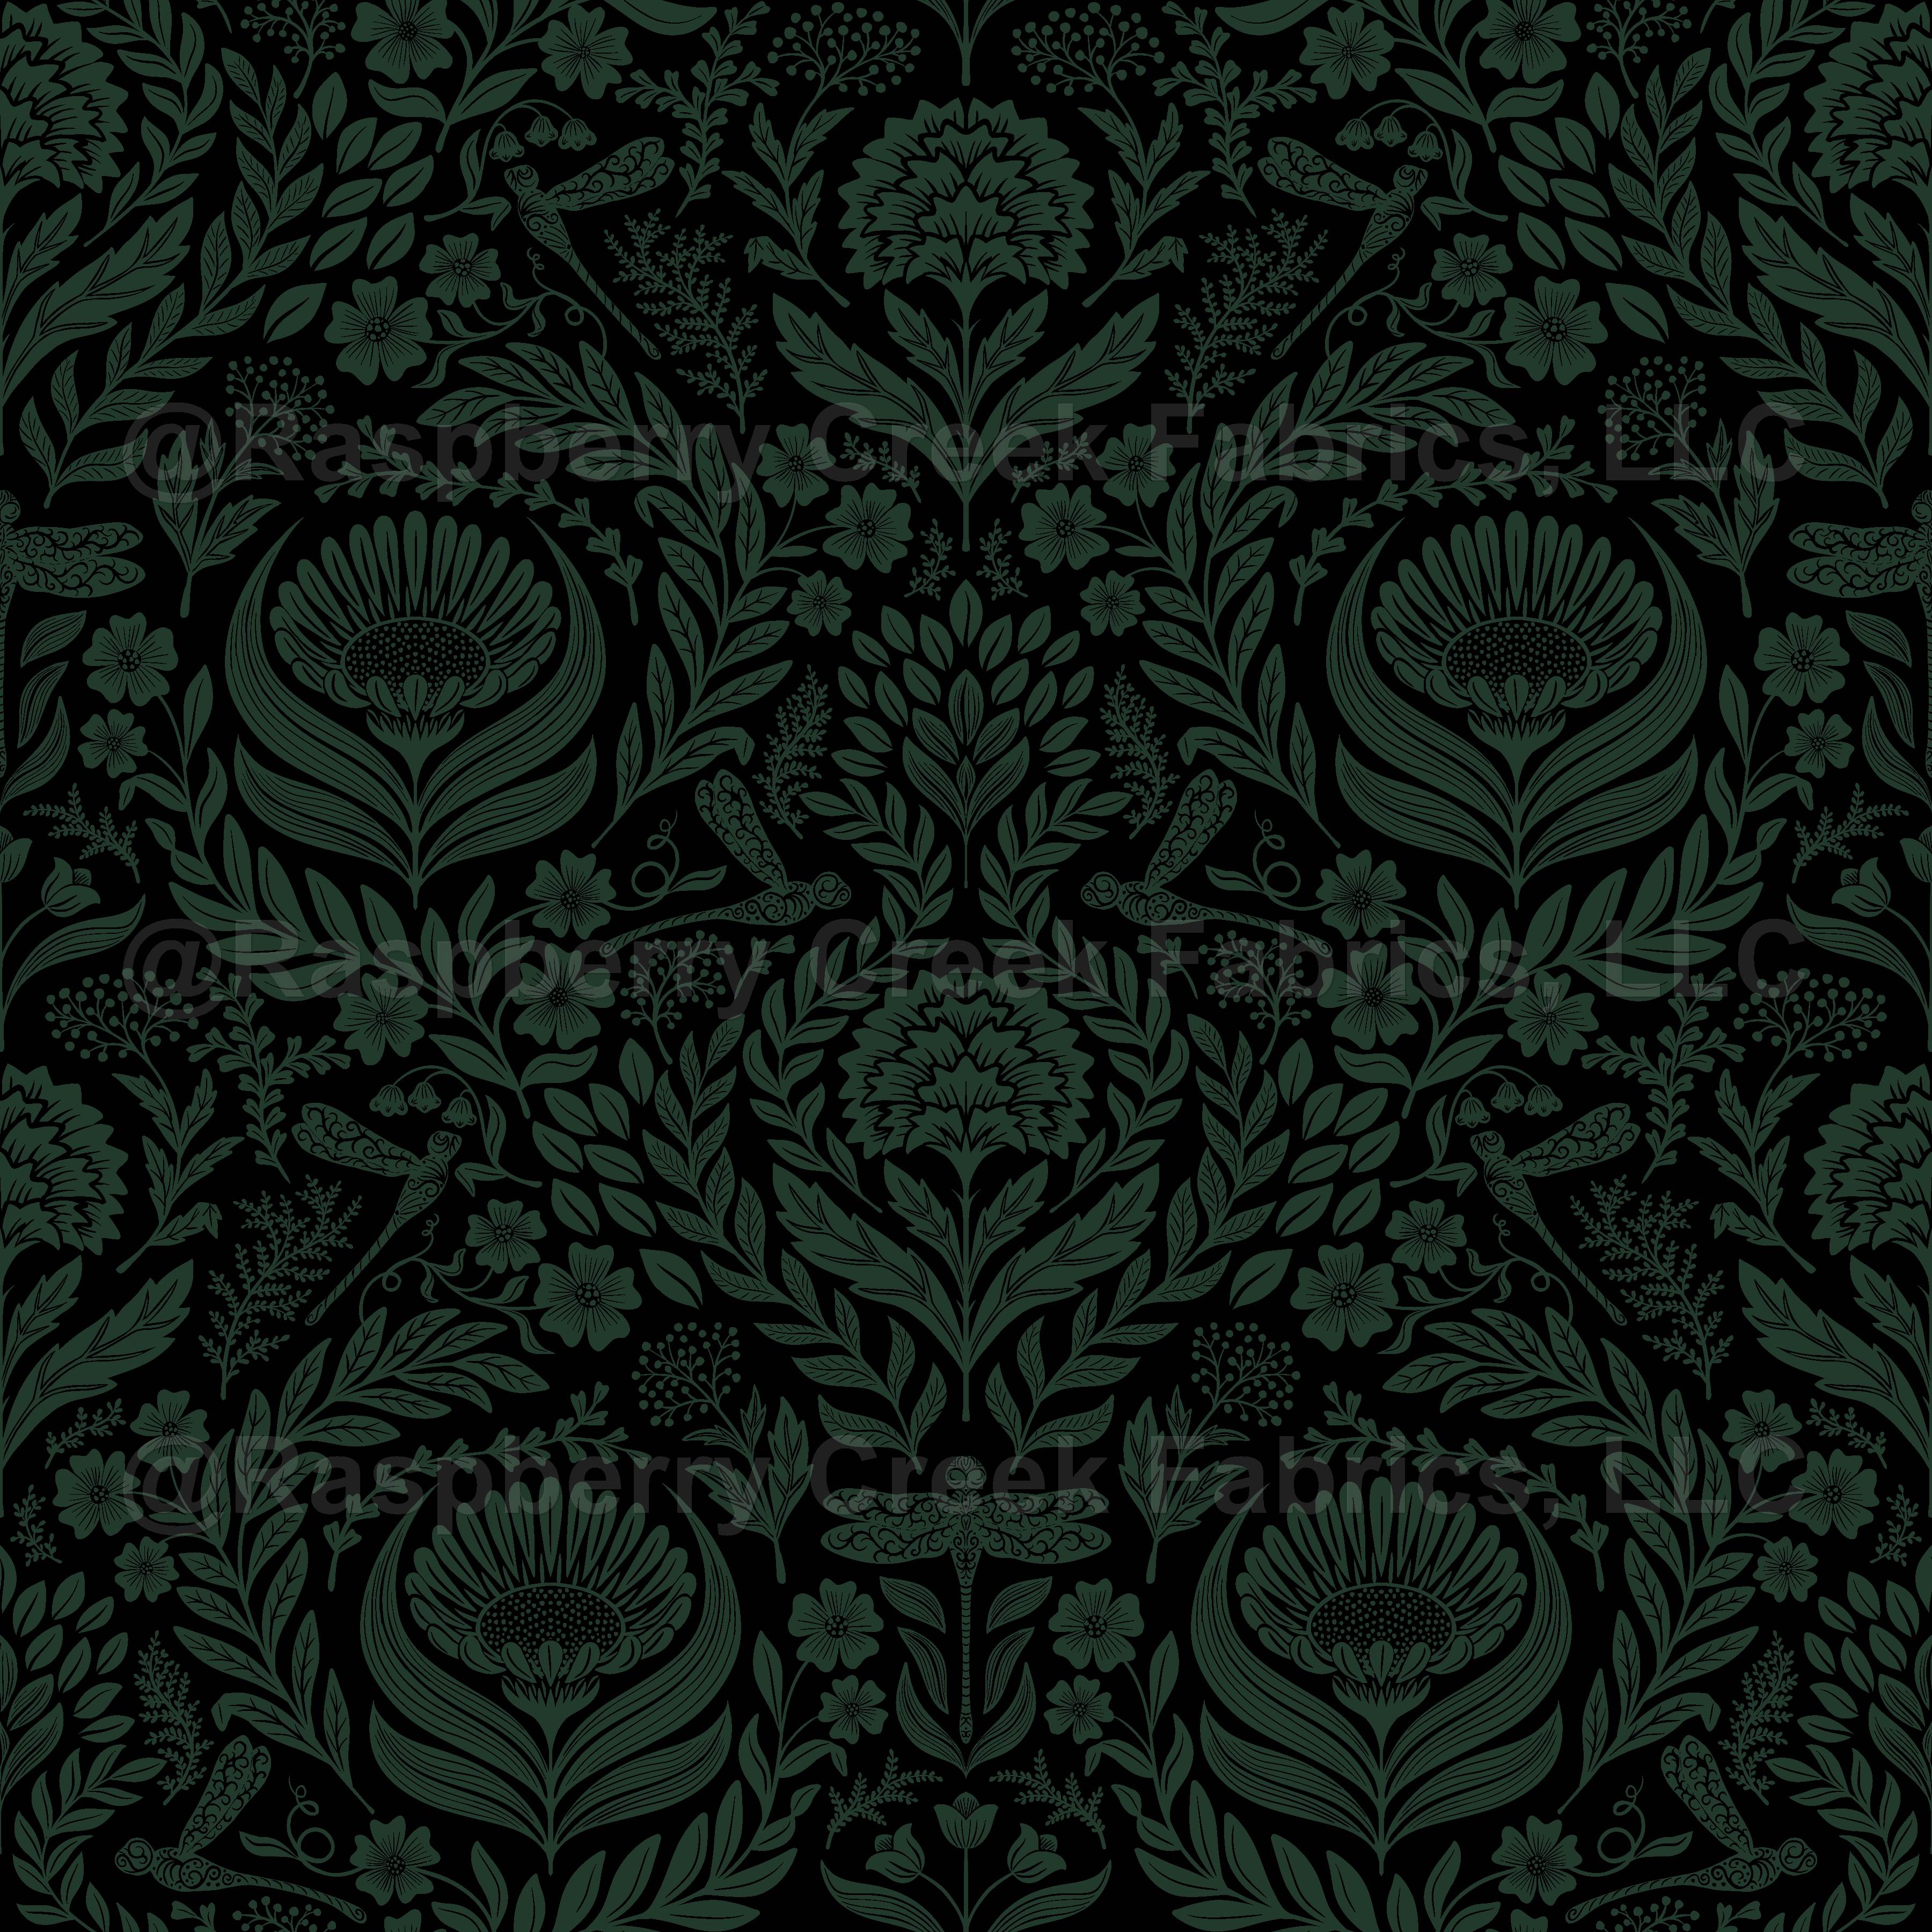 Bronze Golden Vintage Green Classic Damask Wallpaper American Country  Rustic Floral Wall Paper Bedroom Living Room Decor